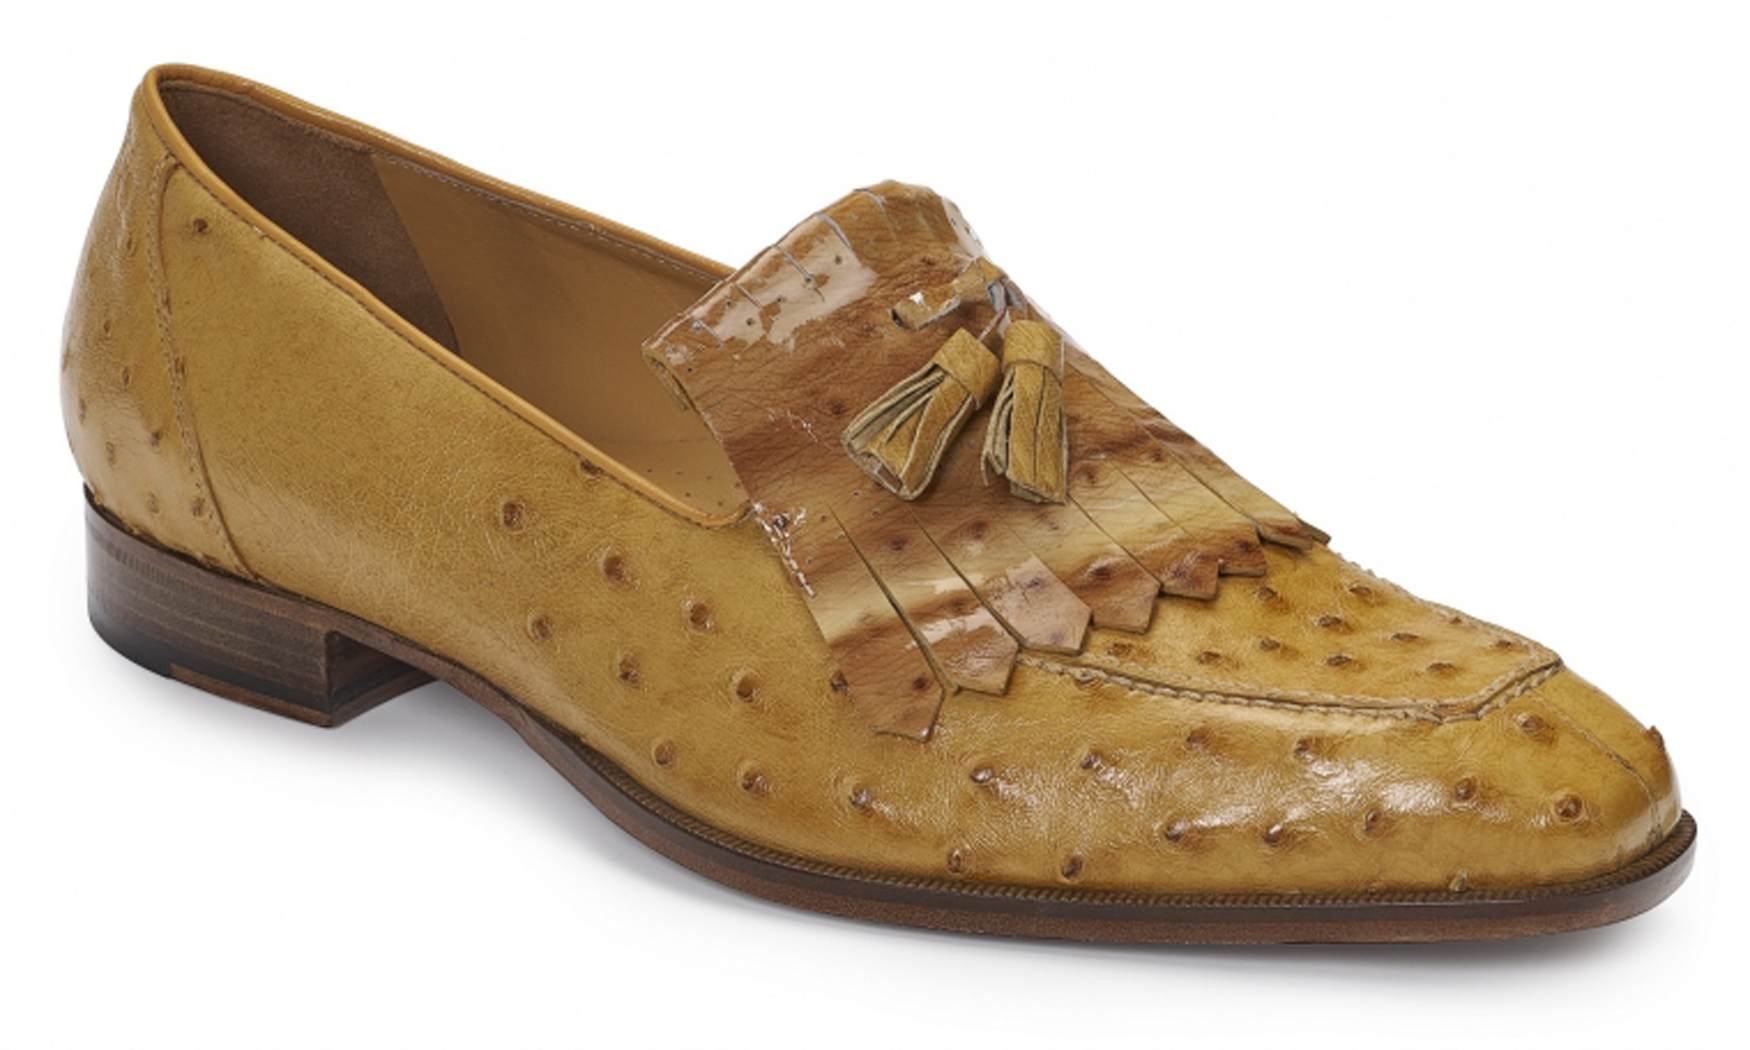 Mauri ''Taro'' 4881 Tabac Genuine Ostrich / Ostrich Patent Leather Moc-Toe Loafers With Kiltye /Tassels.